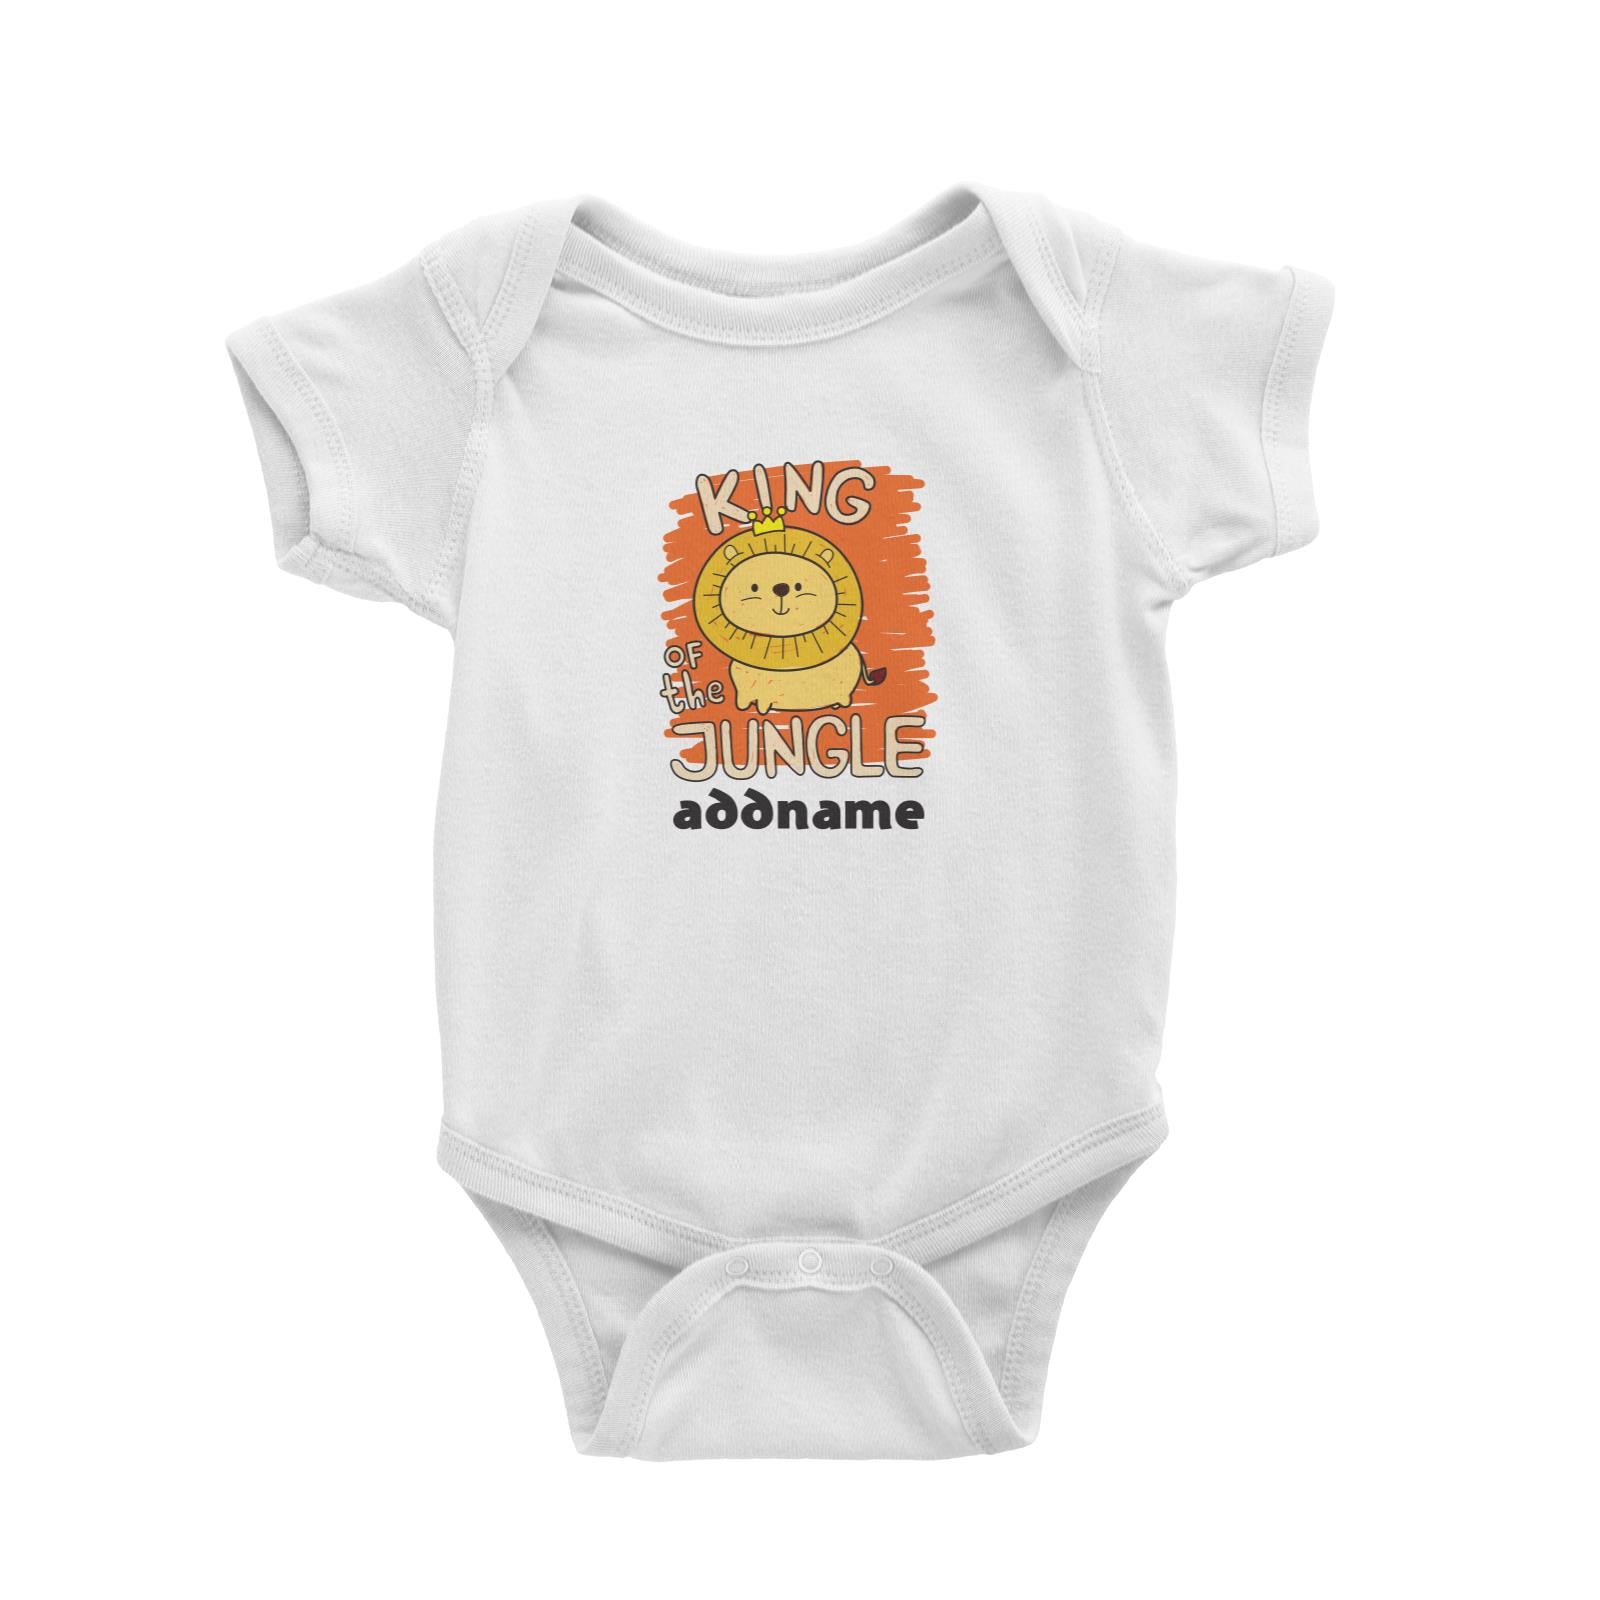 Cool Cute Animals Lion King Of The Jungle Addname Baby Romper